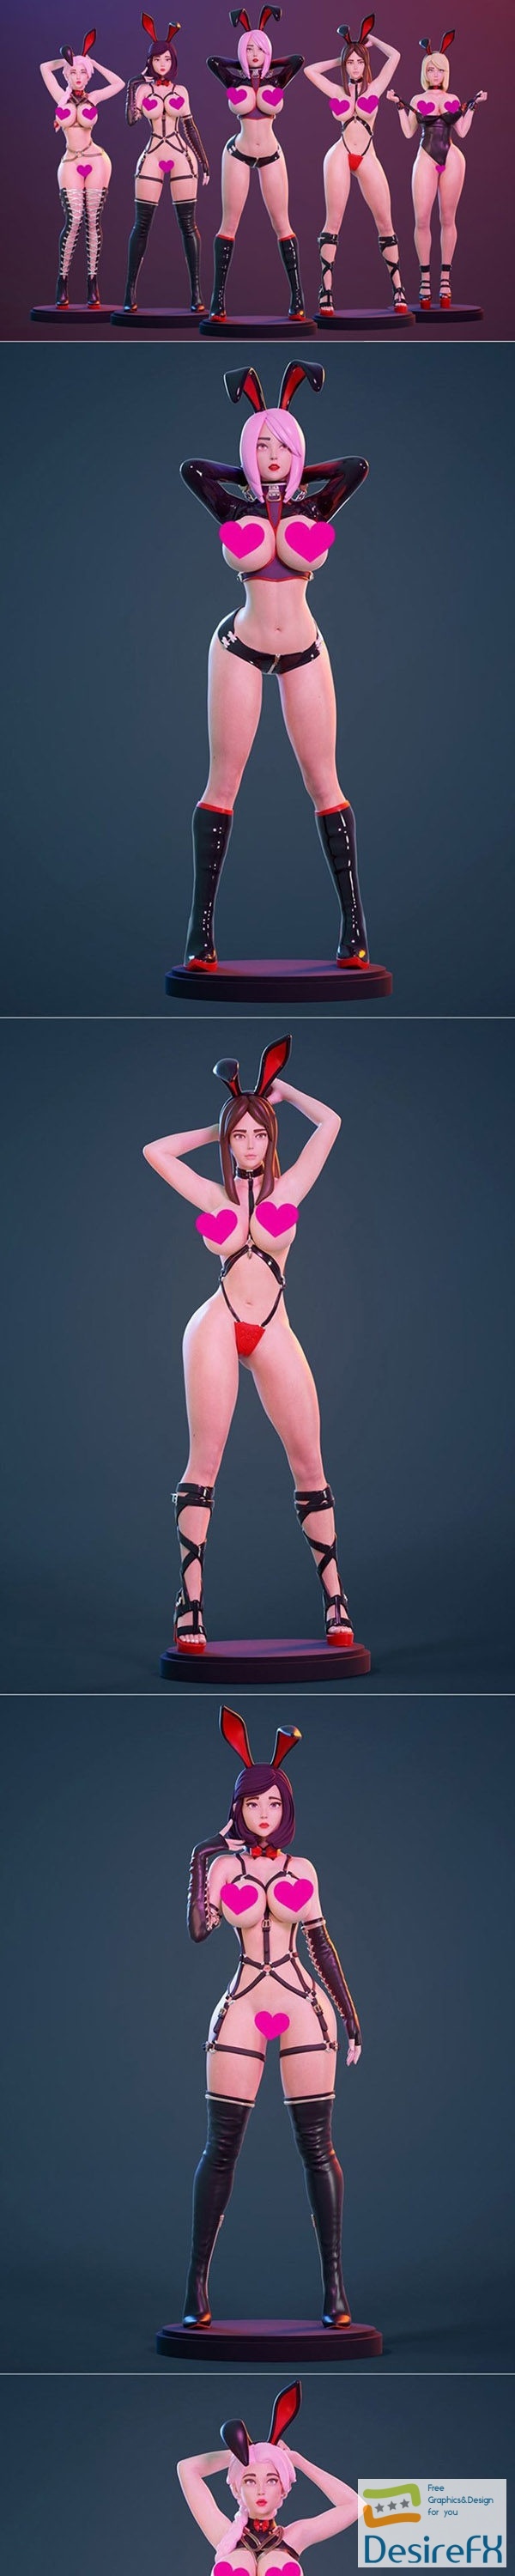 Figurine collection – Bunny girls – 5 pieces – 3D Print